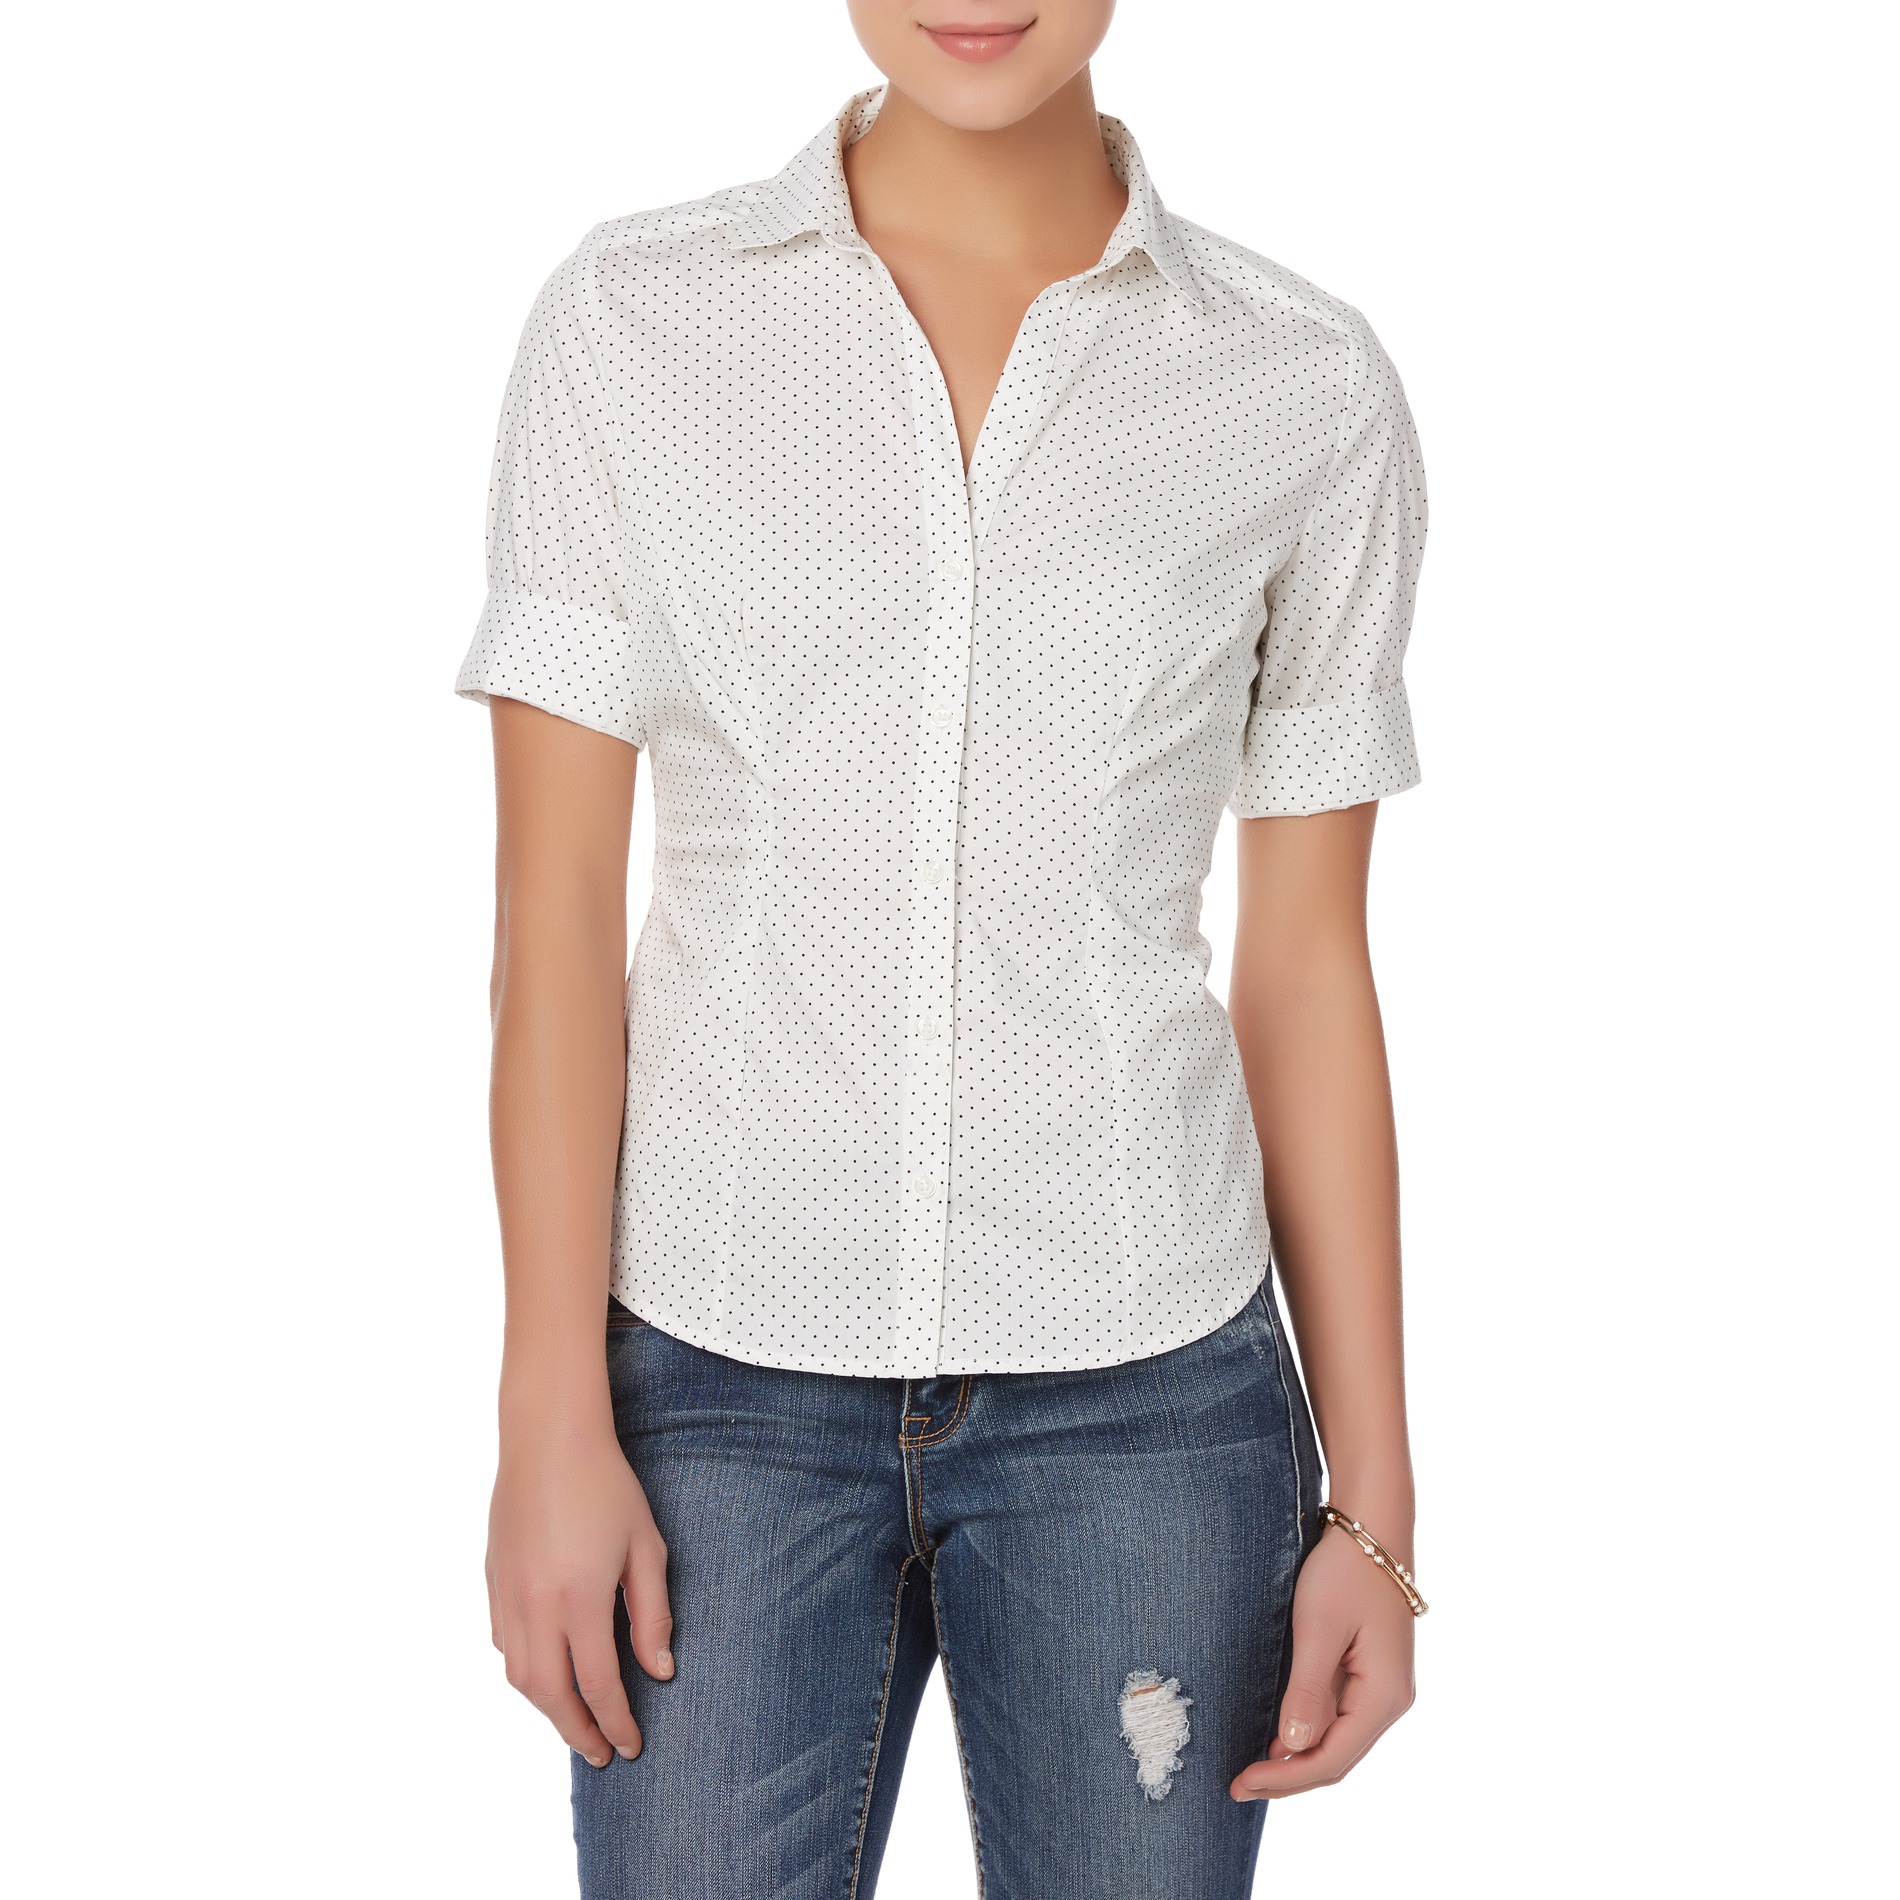 Simply Styled Women's Blouse - Dots